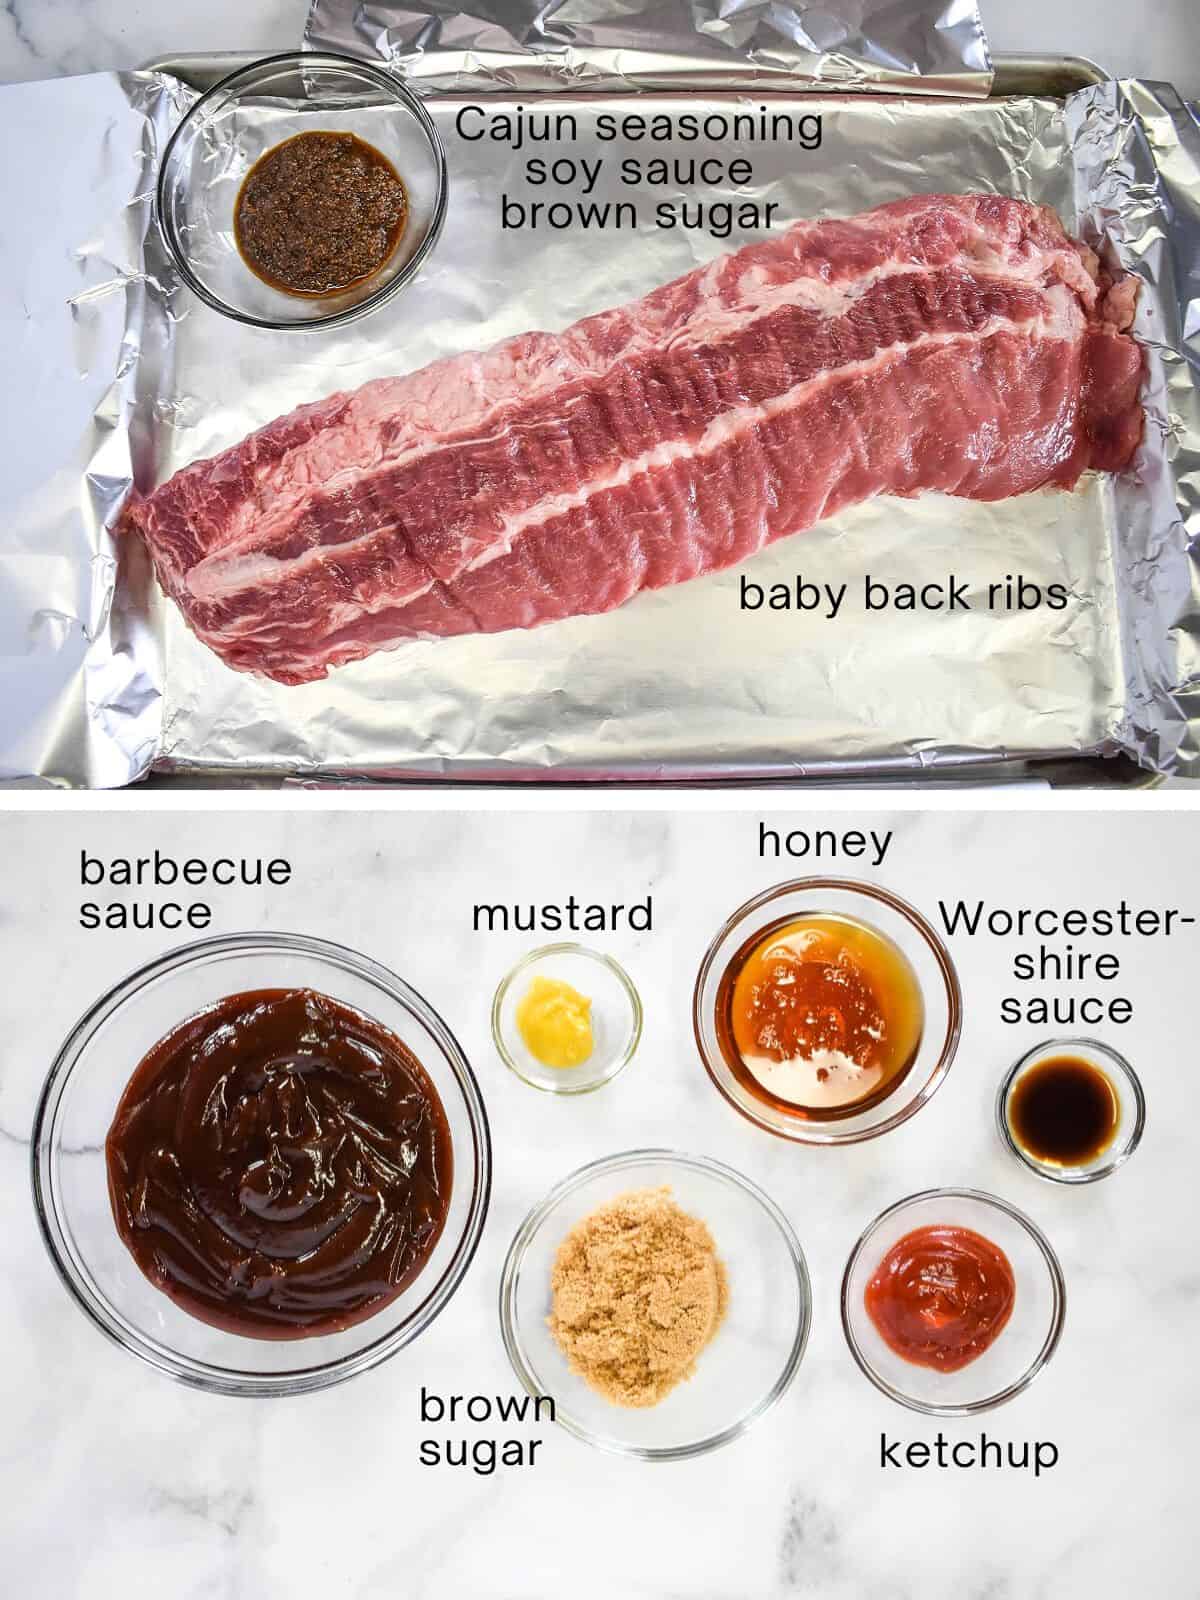 The ingredients for the ribs and sauce prepped and labeled with small black letters.